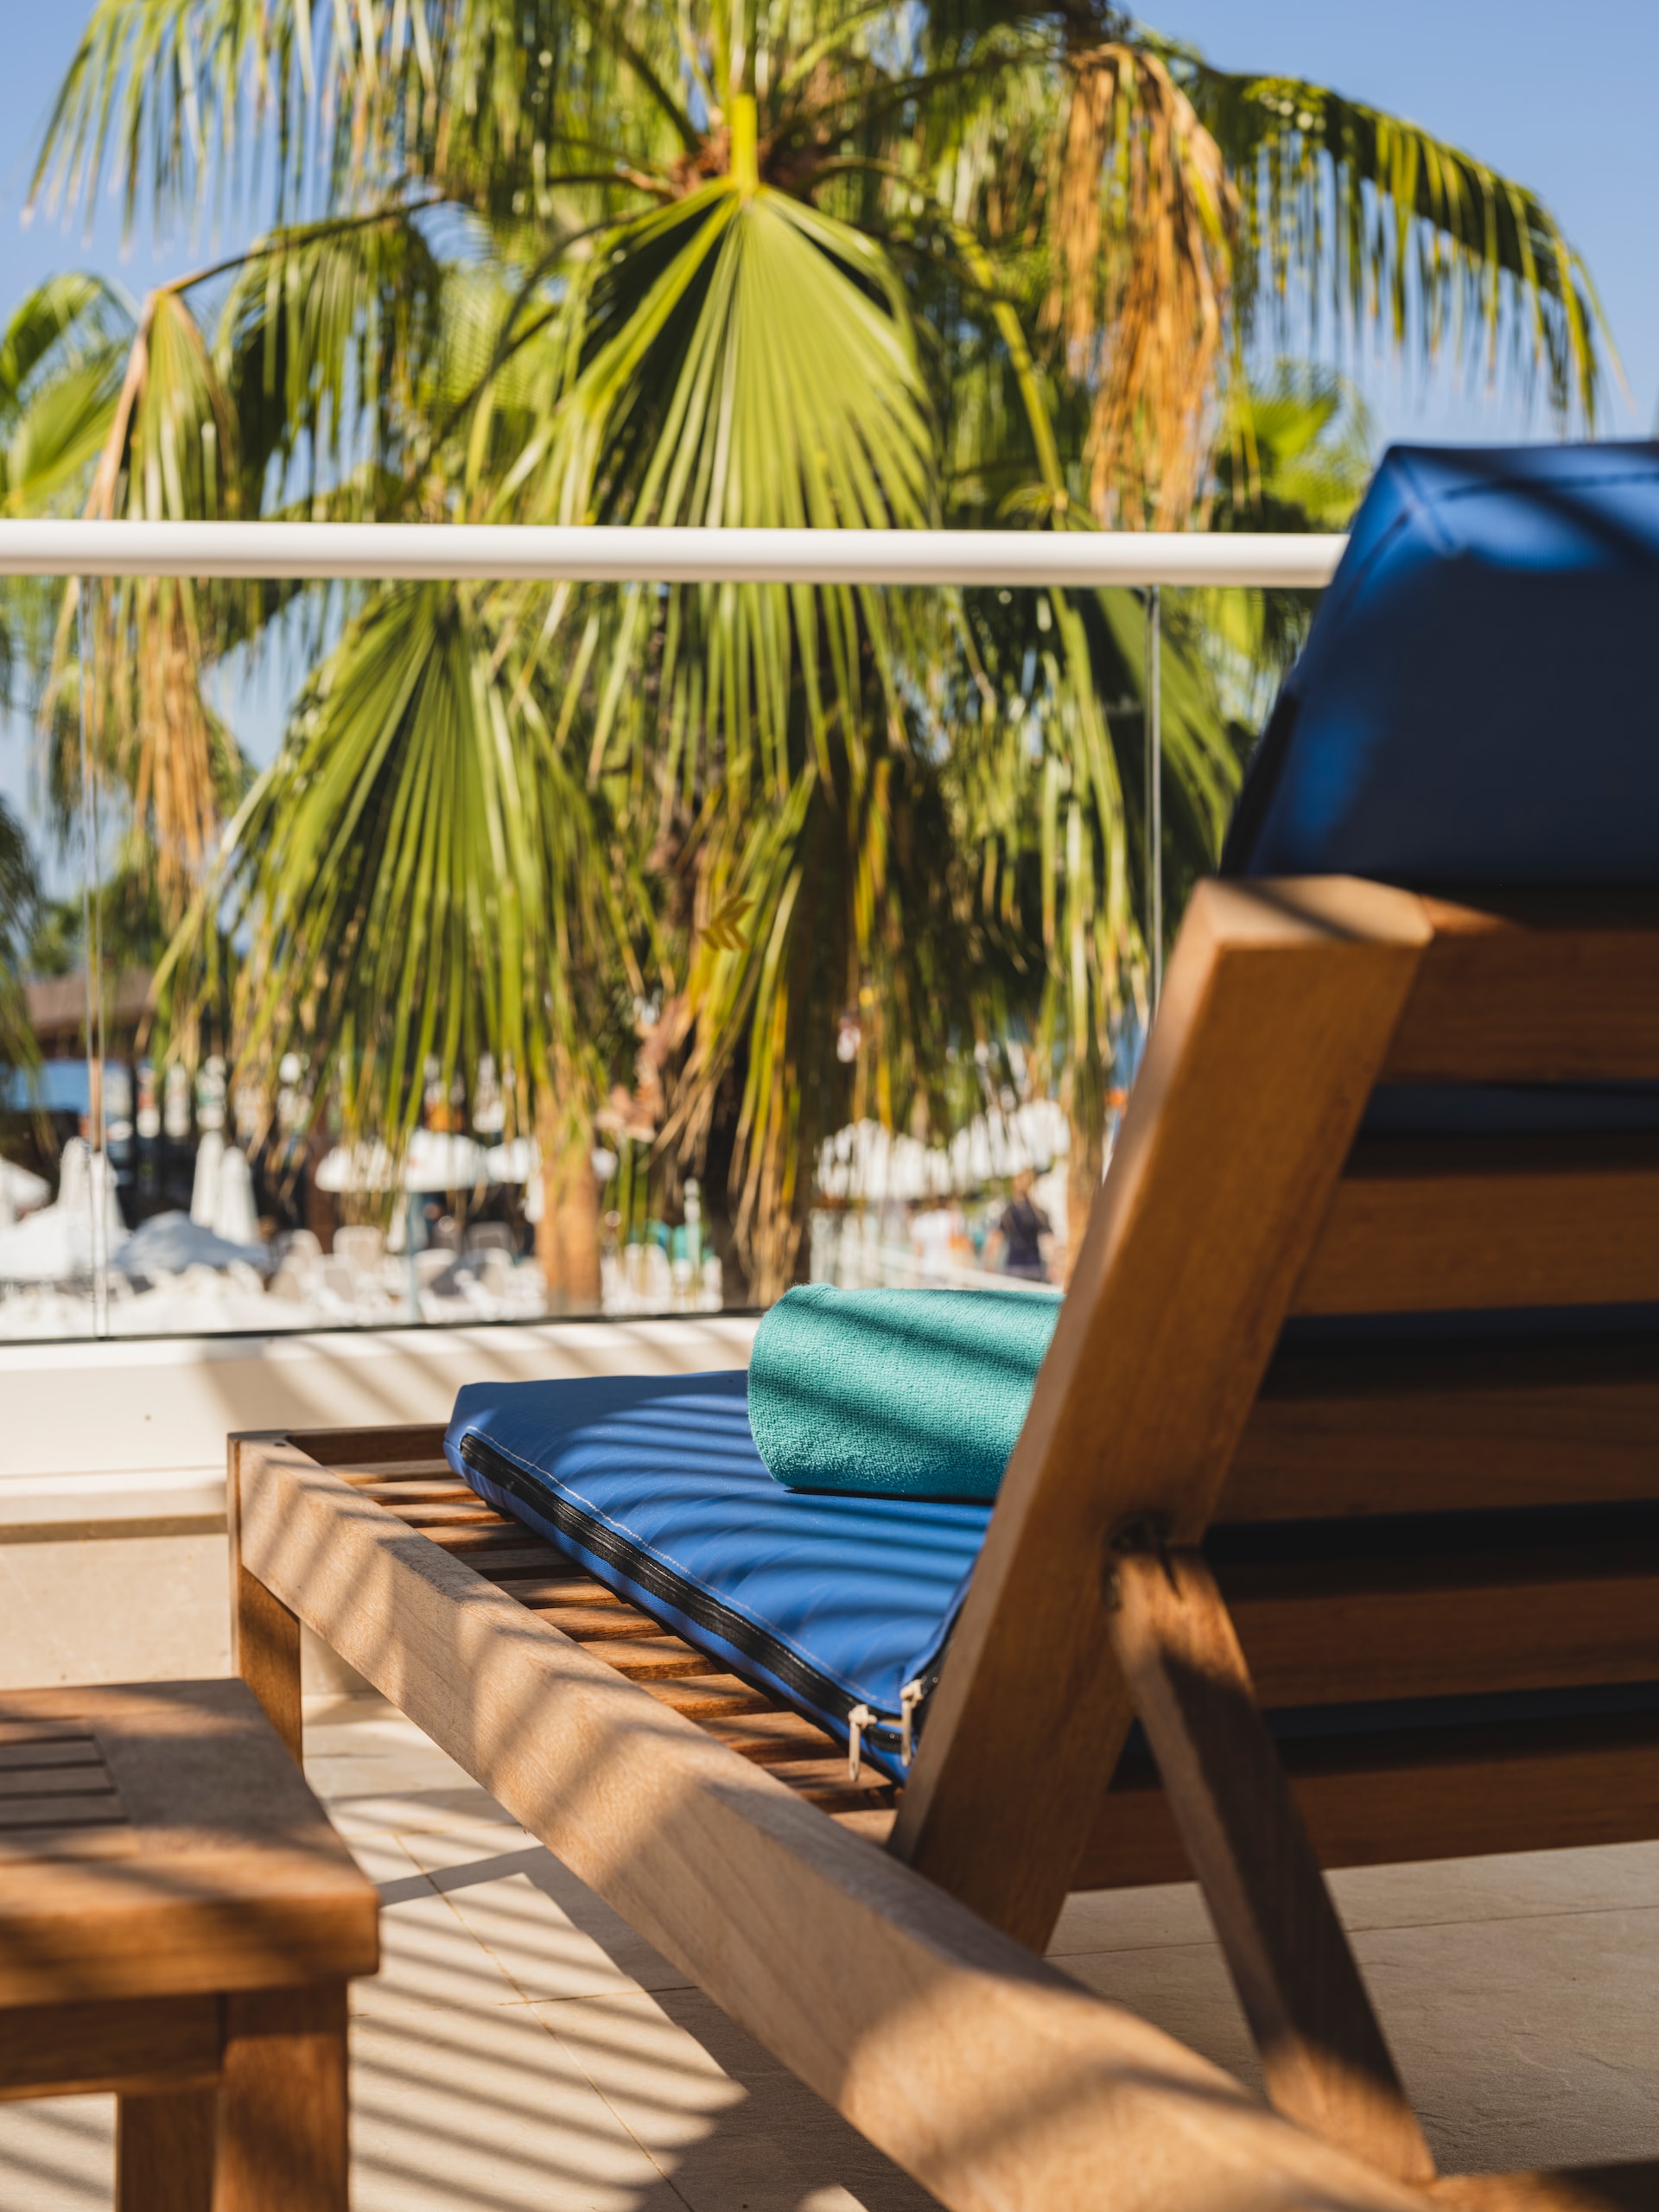 A wooden lounge chair on a deck by the beach